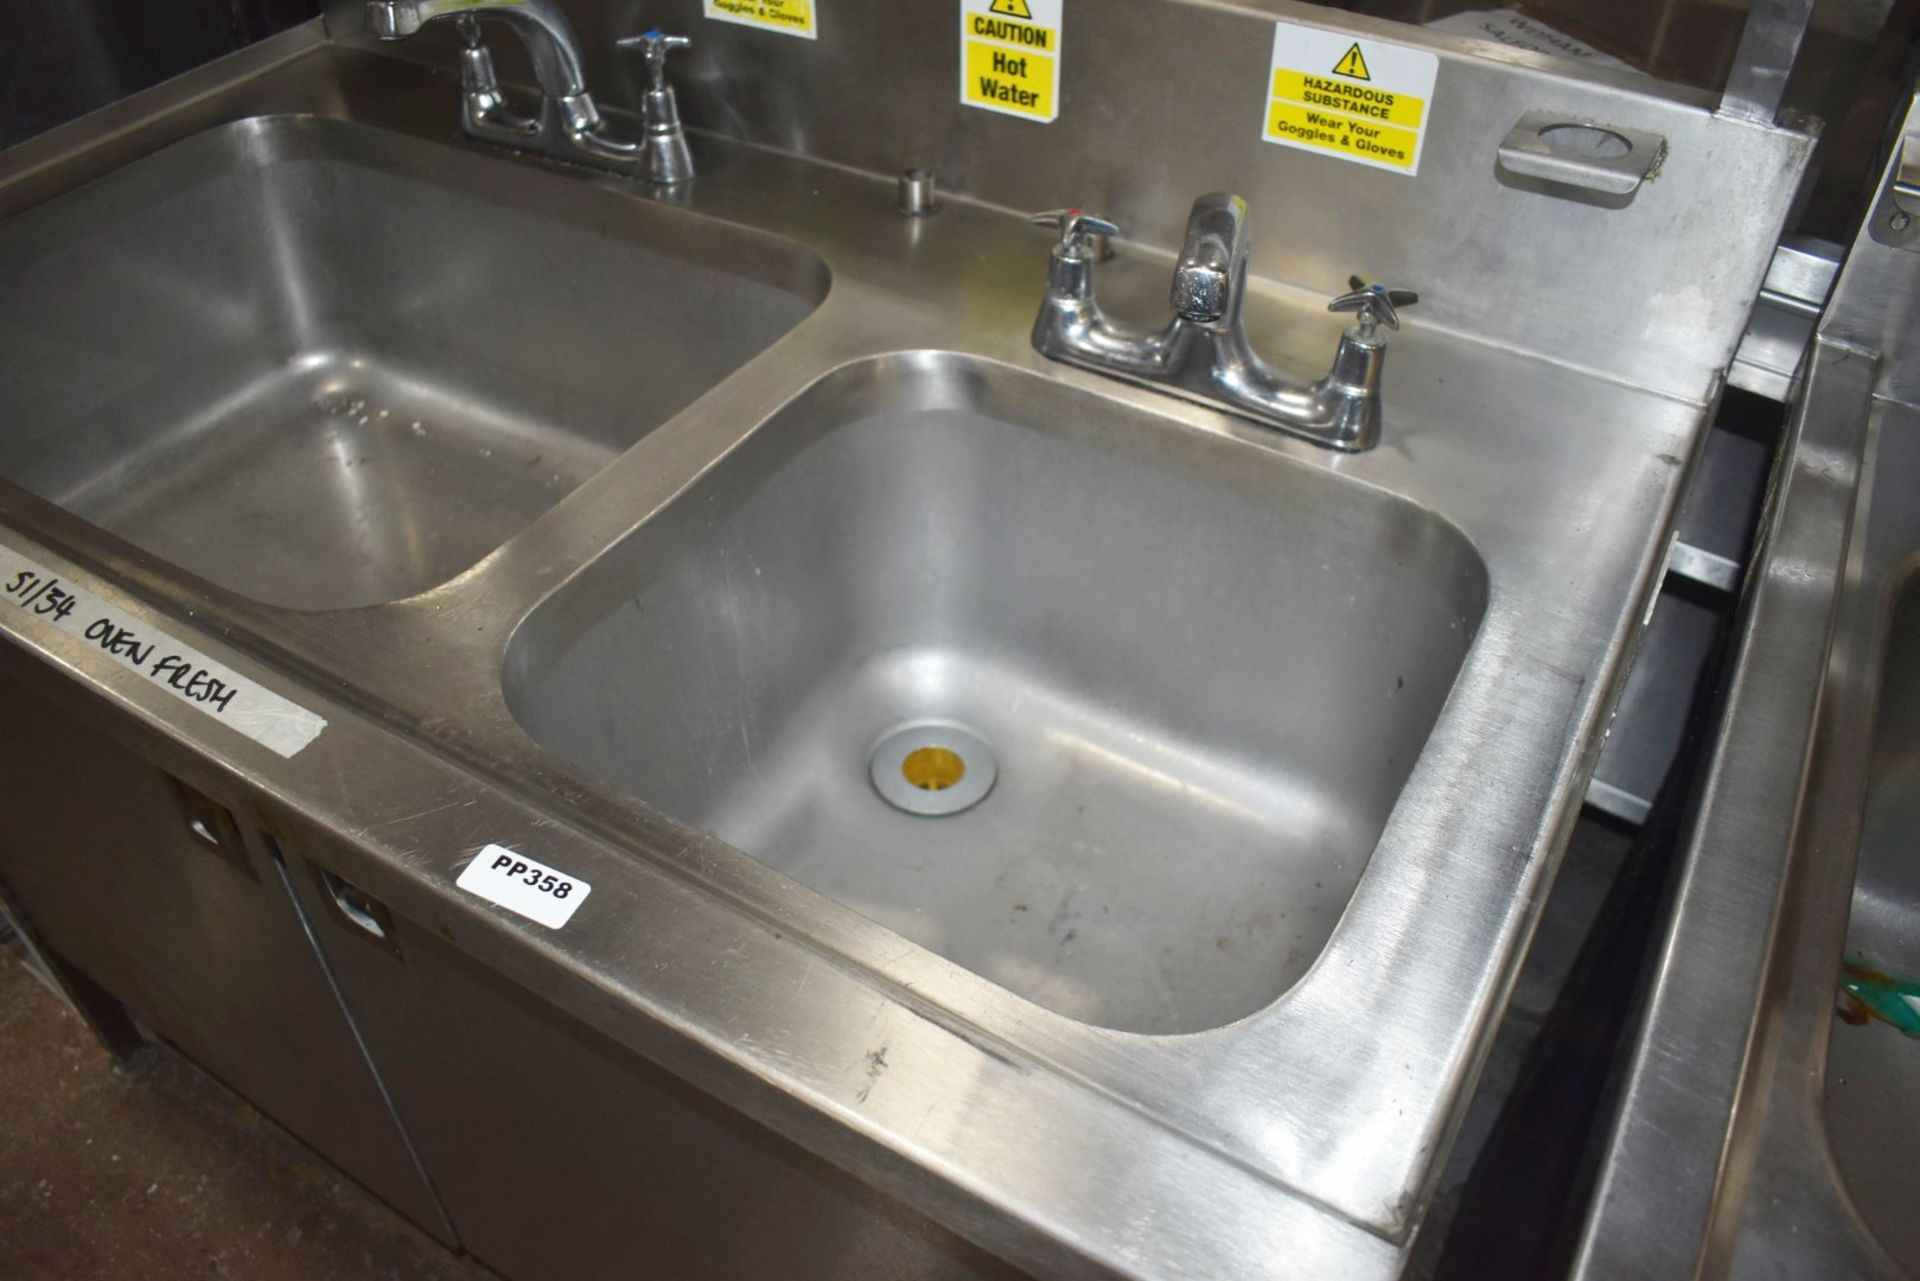 1 x Commercial Kitchen Wash Station With Two Large Sink Bowls, Mixer Taps, Overhead Drying Rack - Image 9 of 9